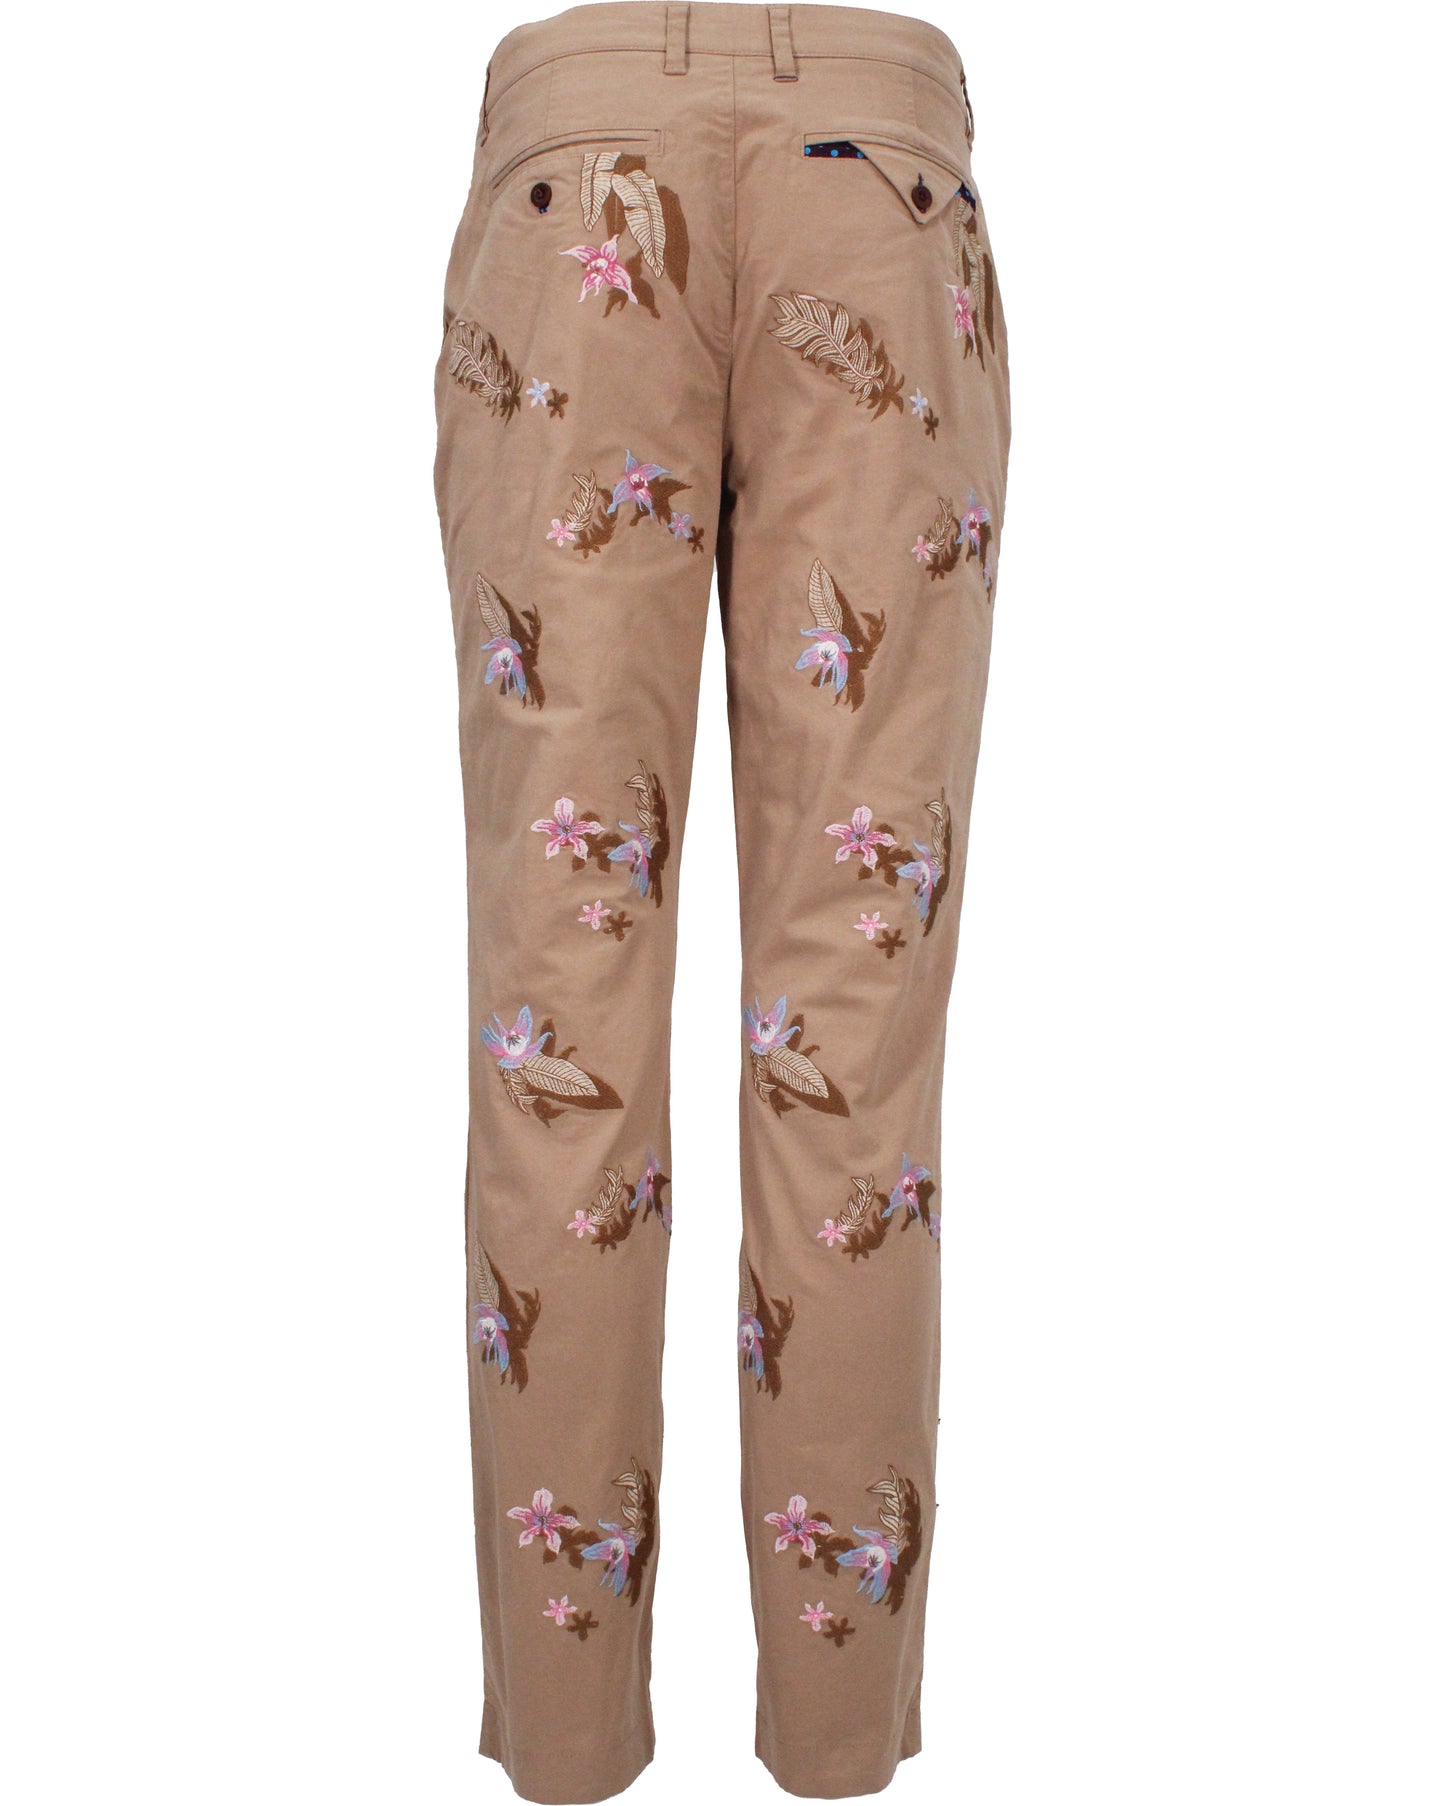 CHARLES FLOWER EMBROIDERY PANT - SAND